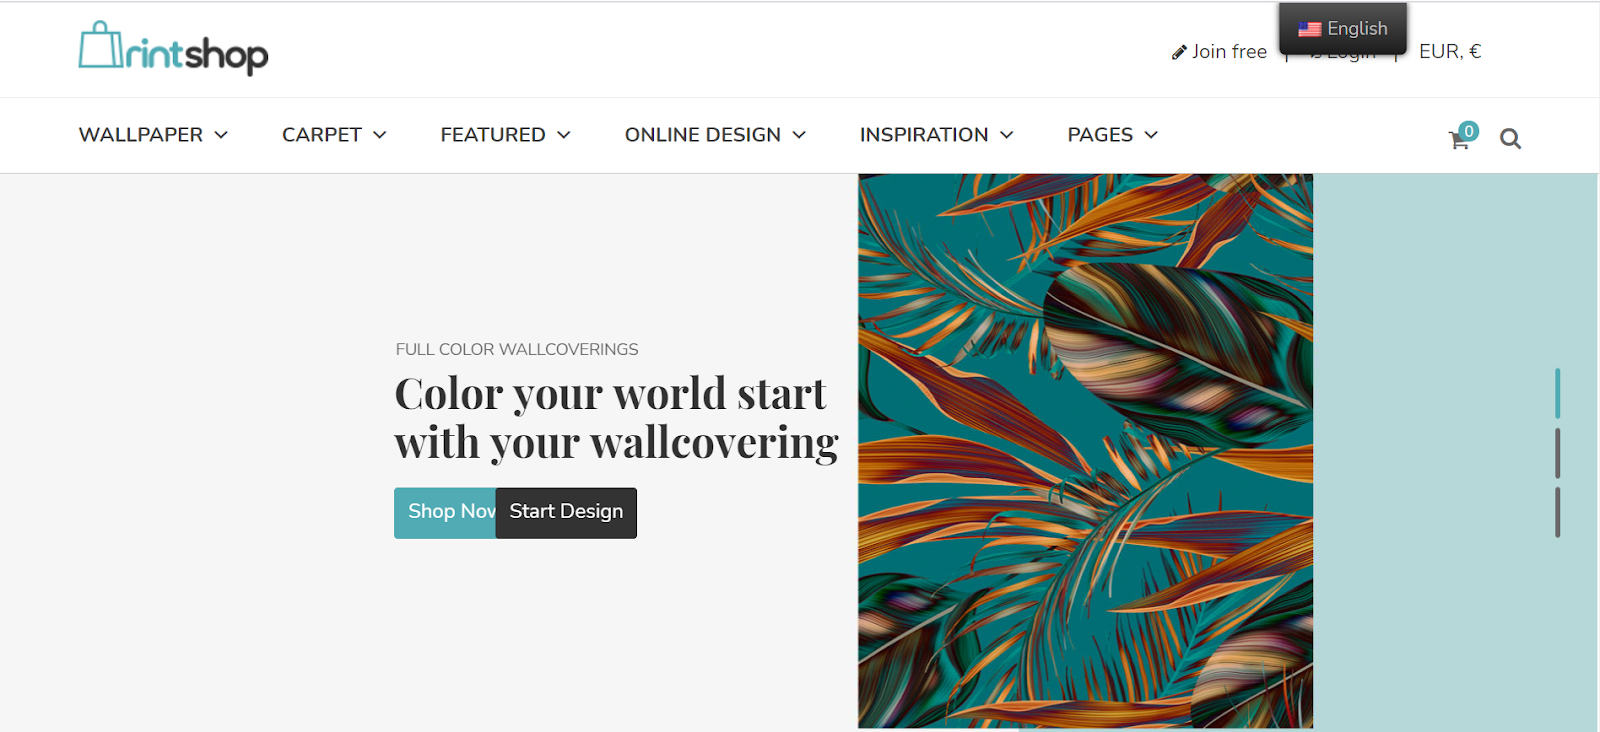 How a POD business apply personalization trend into Wallpaper Online Design?